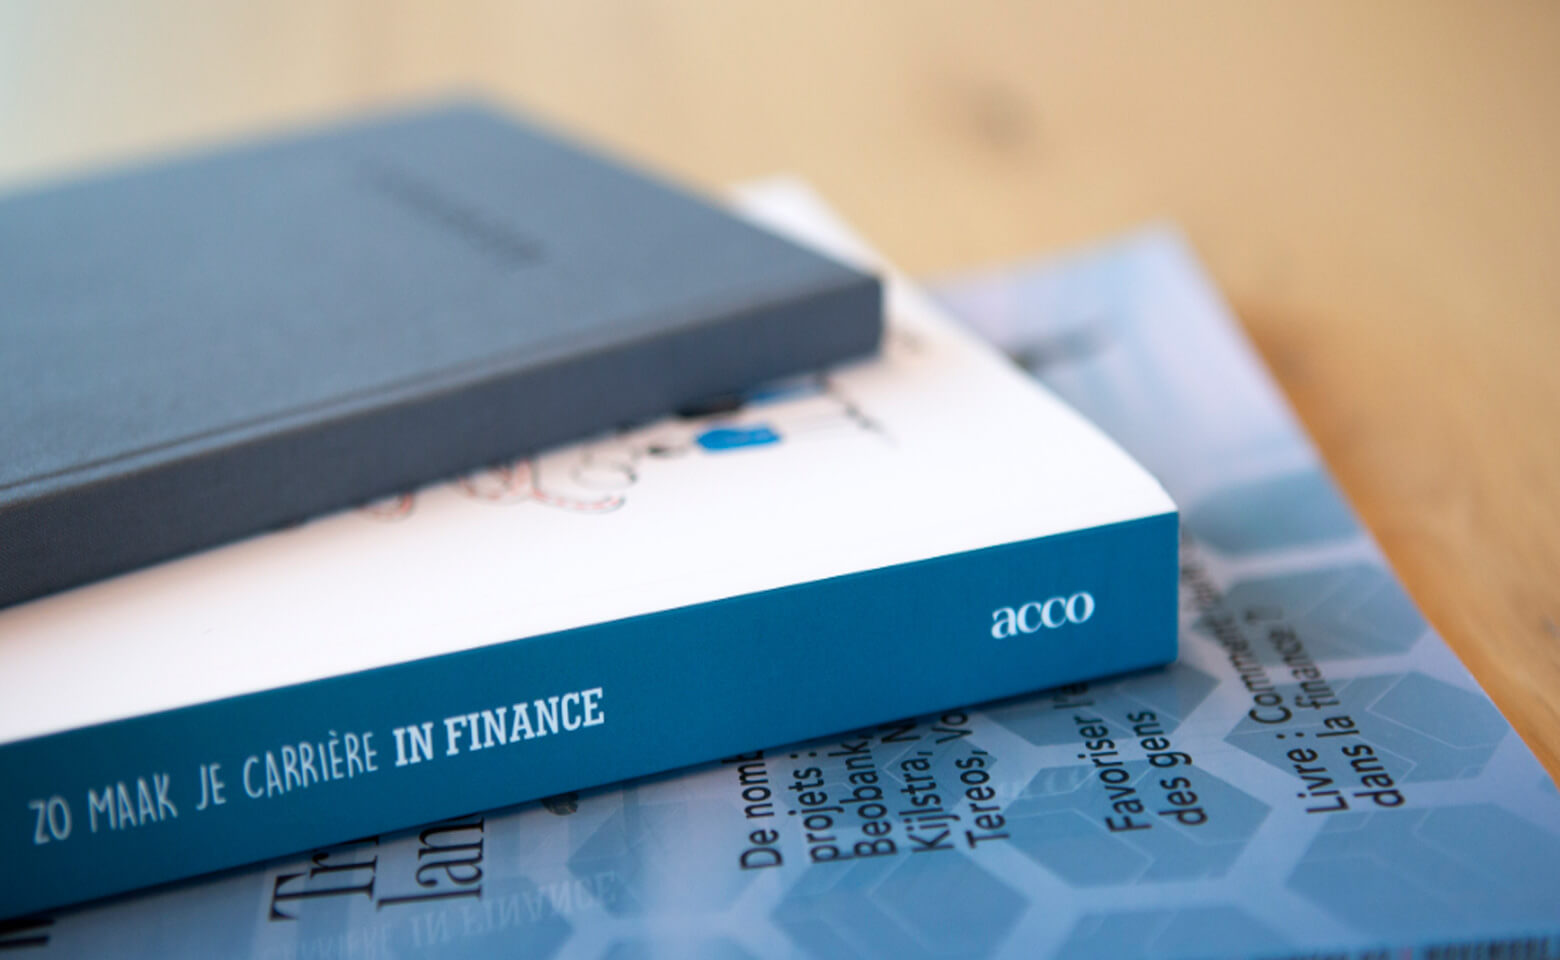 The book 'Zo maak je carrière in finance' relates the career lessons of 30 CFO's.